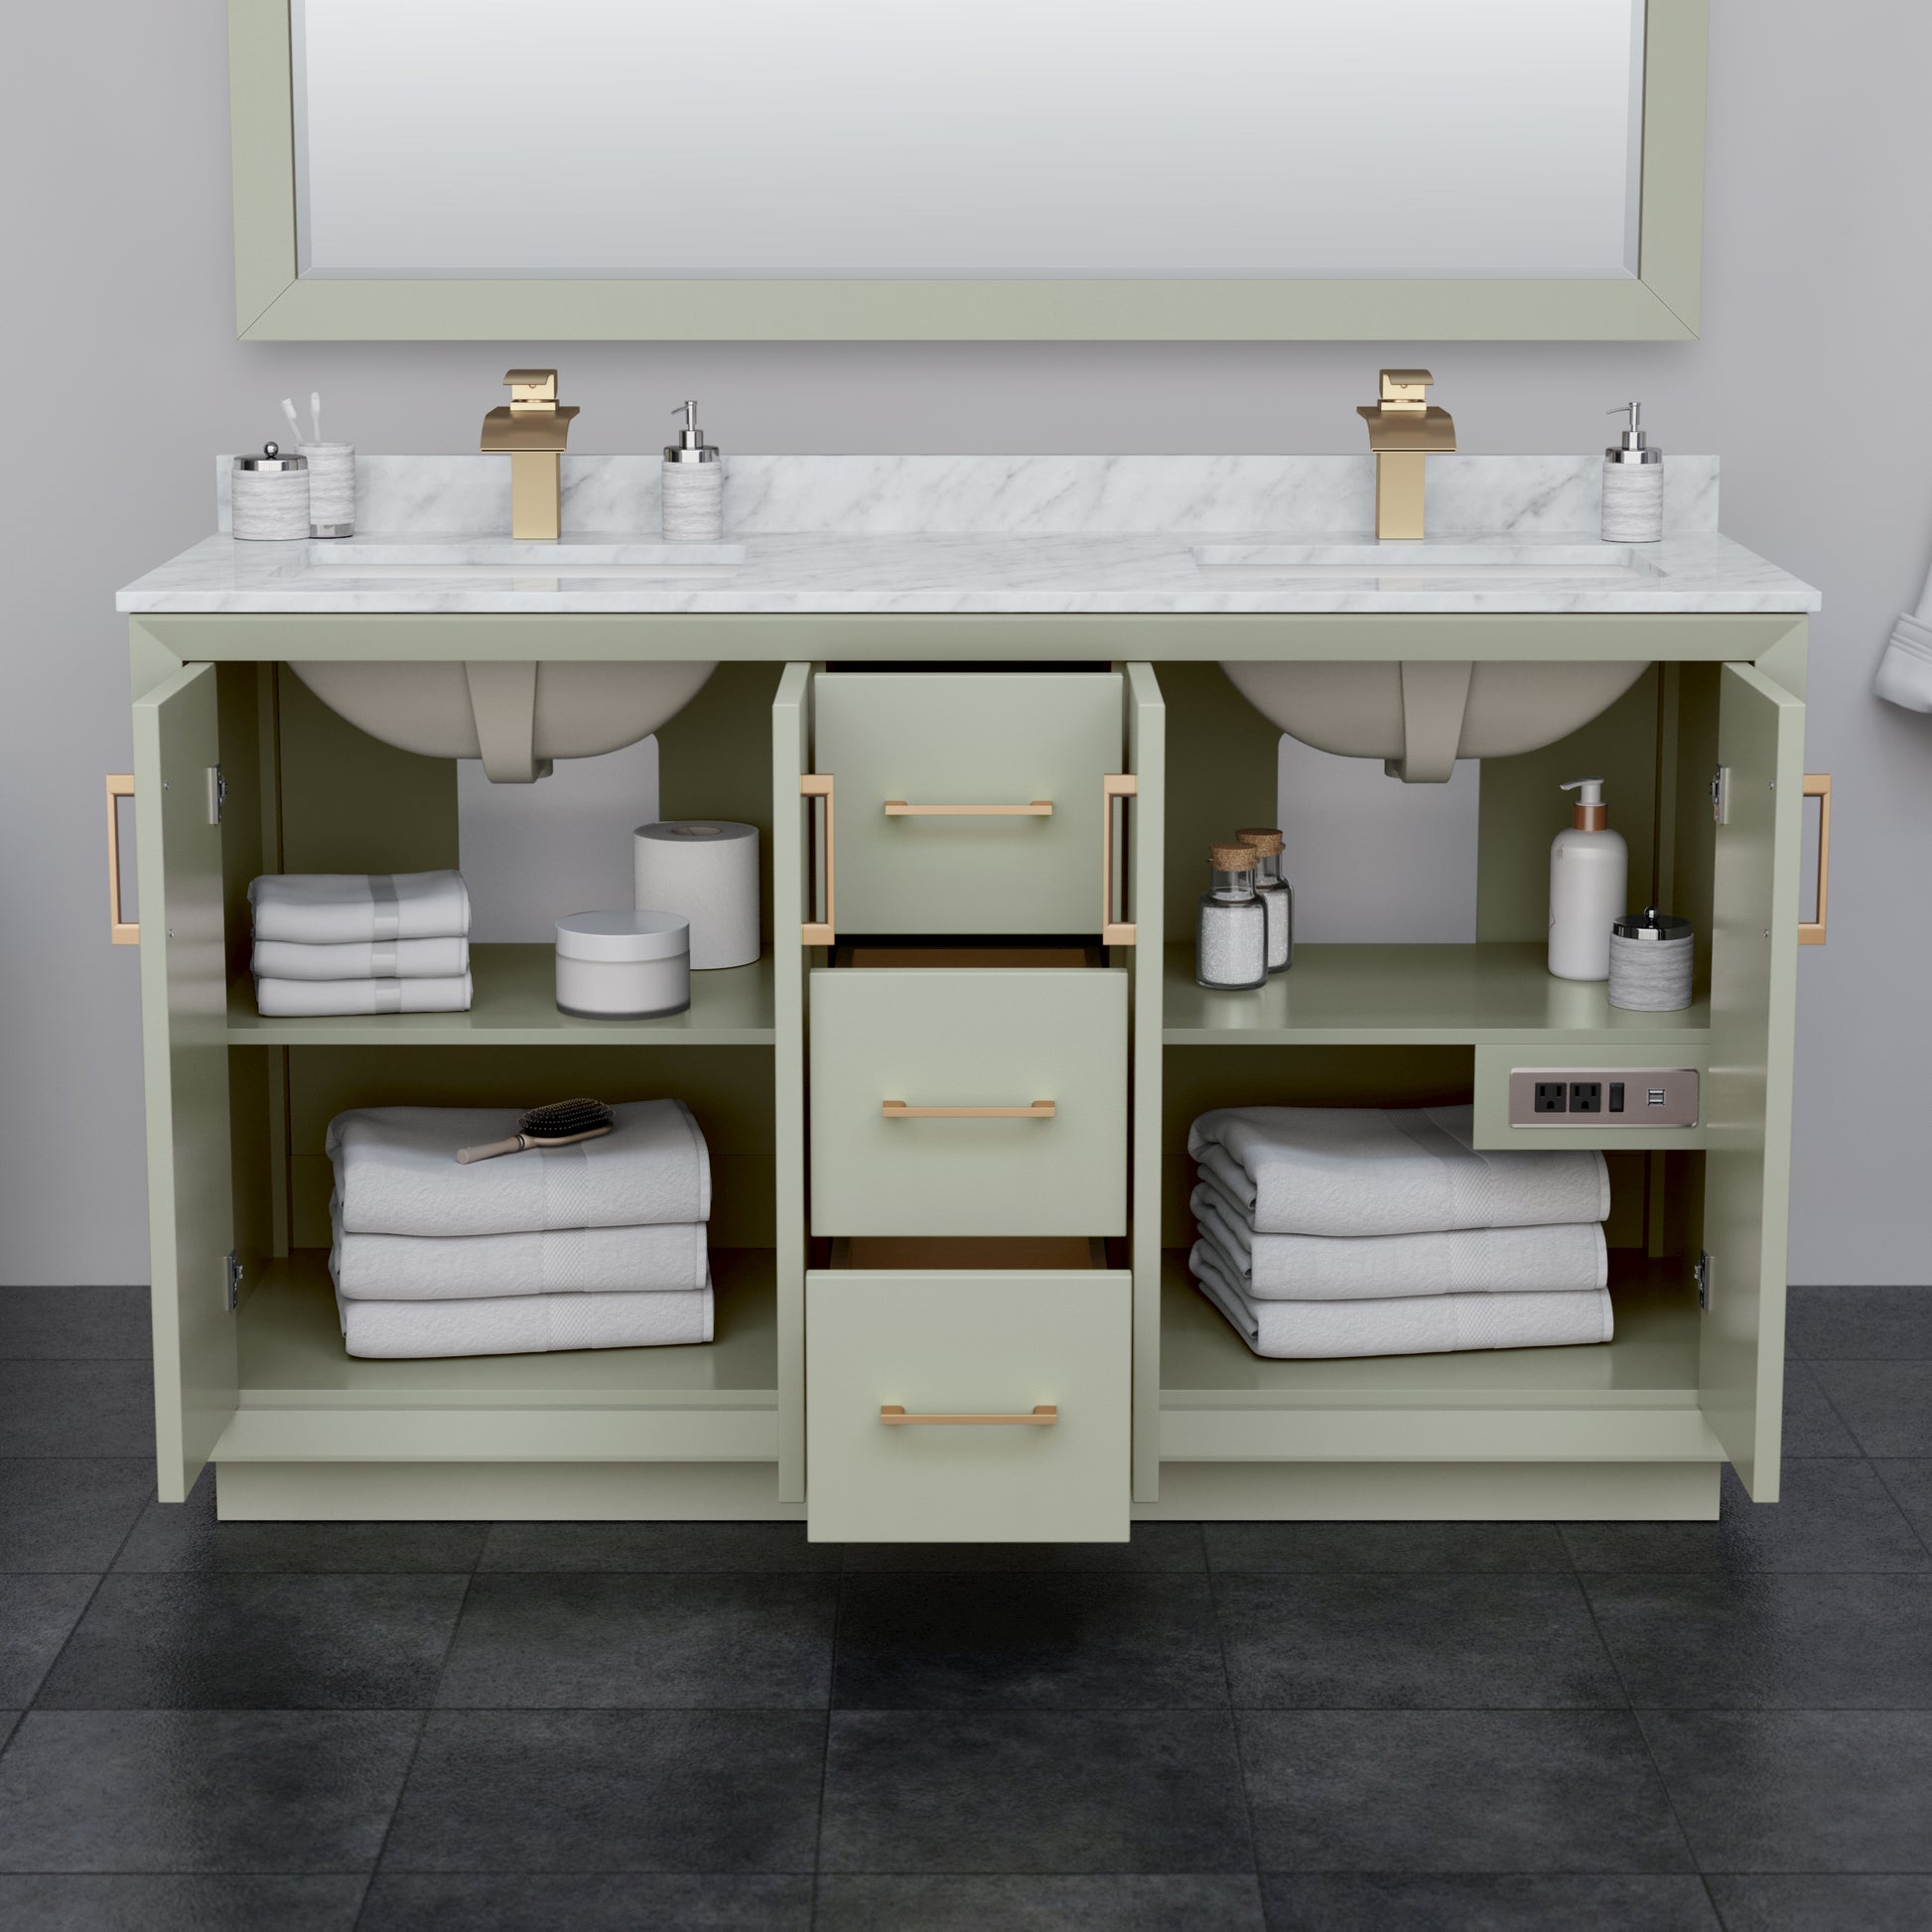 
  
  Strada Double Sink Vanity with White Carrara Marble, Undermount Square Sink, Optional Trim and Mirror
  
